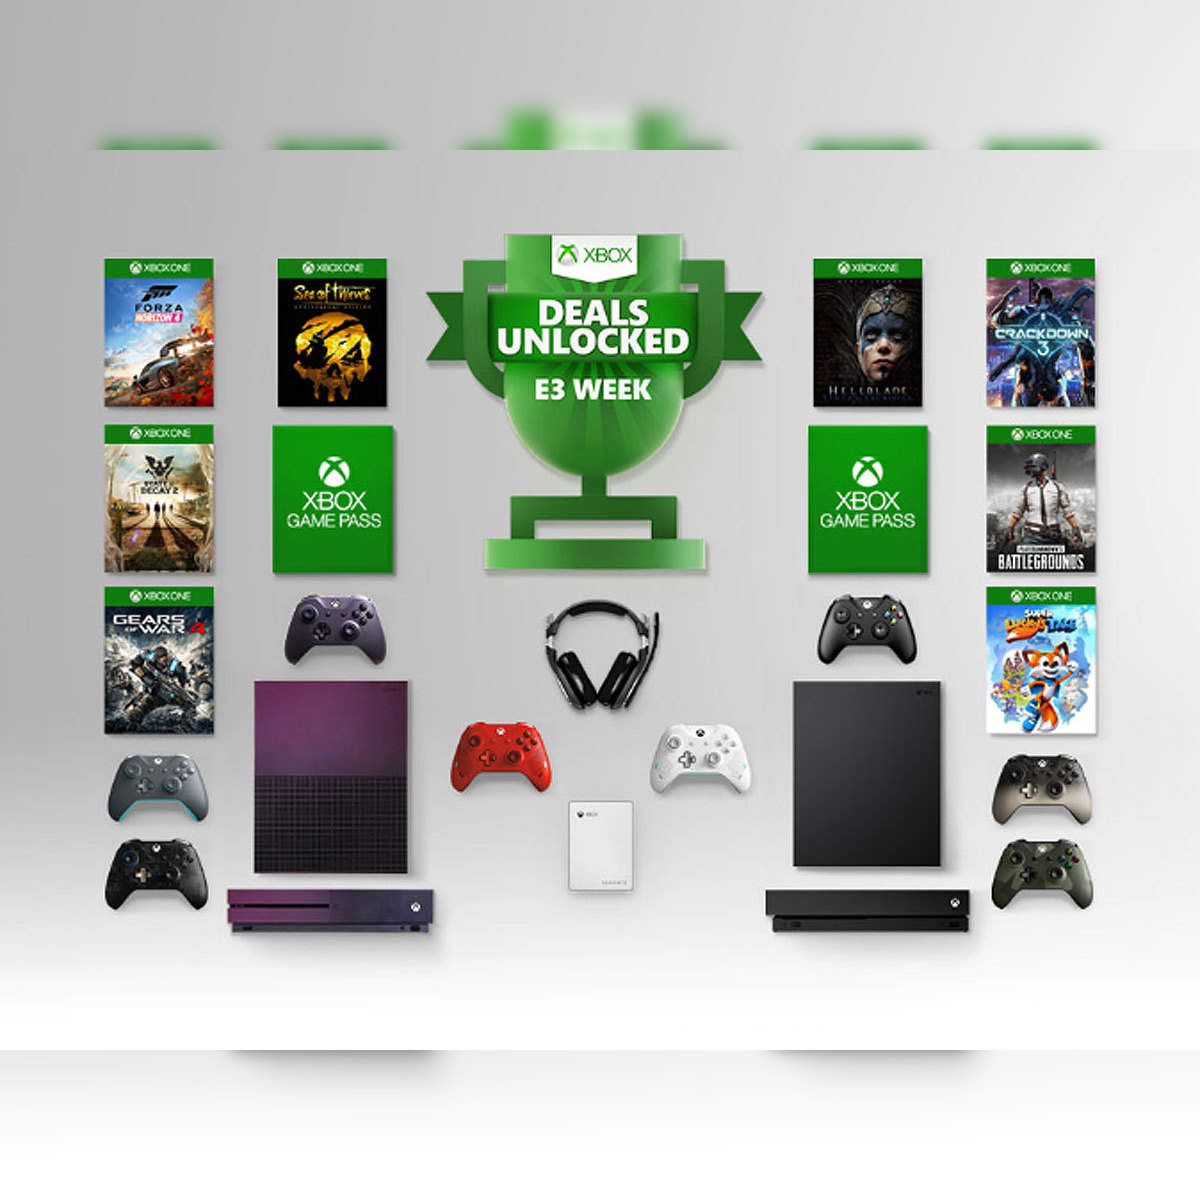 E3 2019: Xbox Game Pass Ultimate And Game Pass PC Now Available